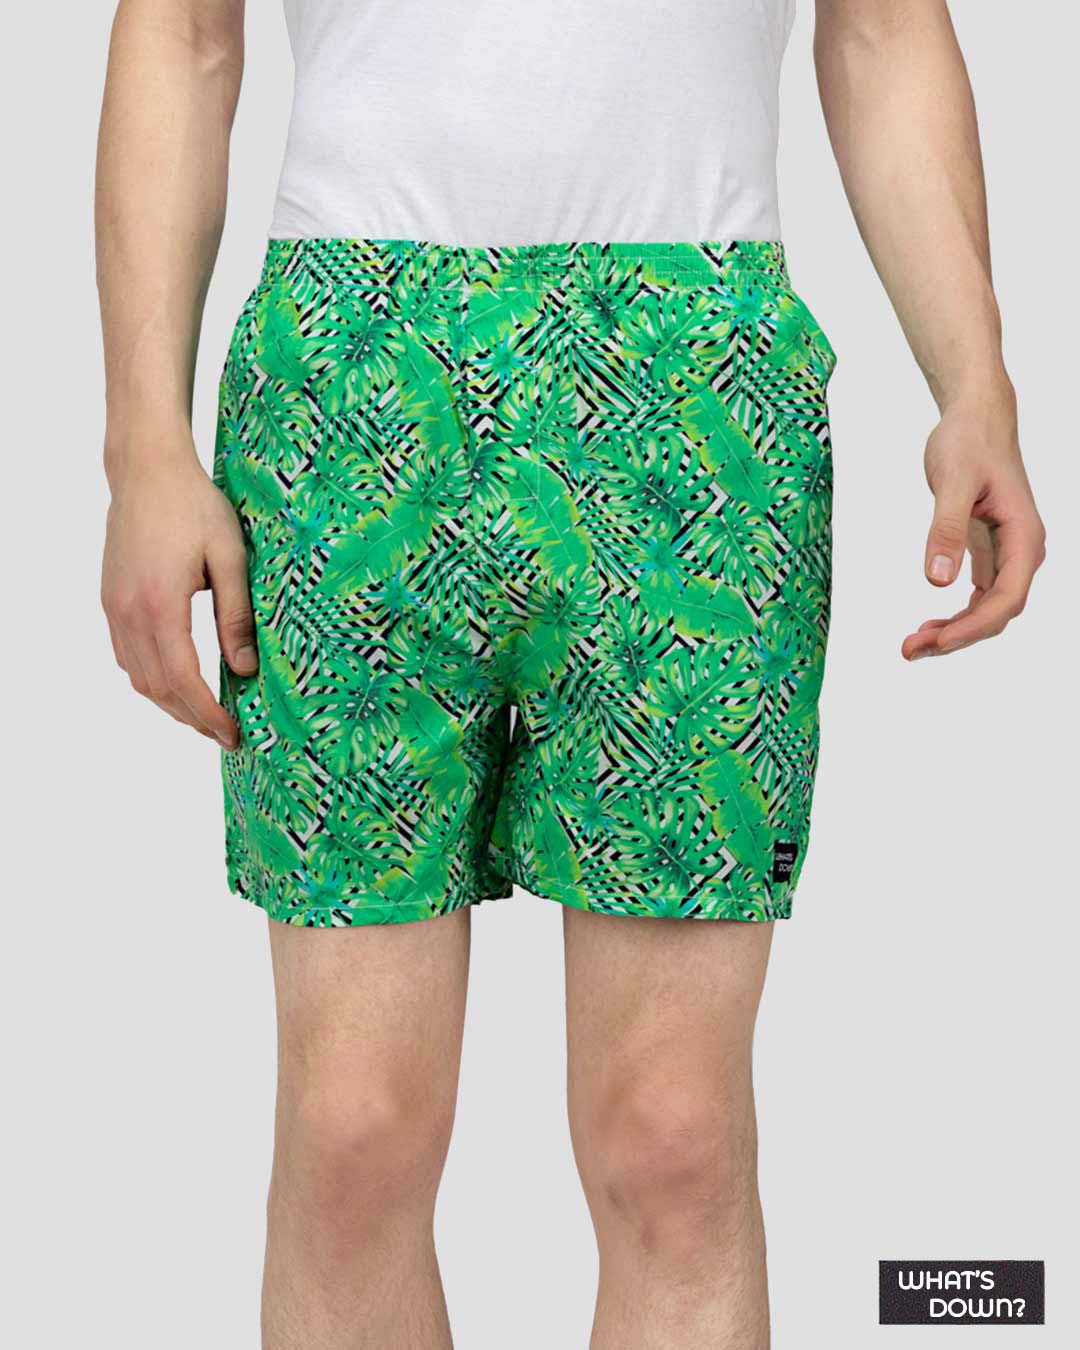 Buy What's Down | Tropical Scenery Boxer Shorts | Green Forest Boxers ...